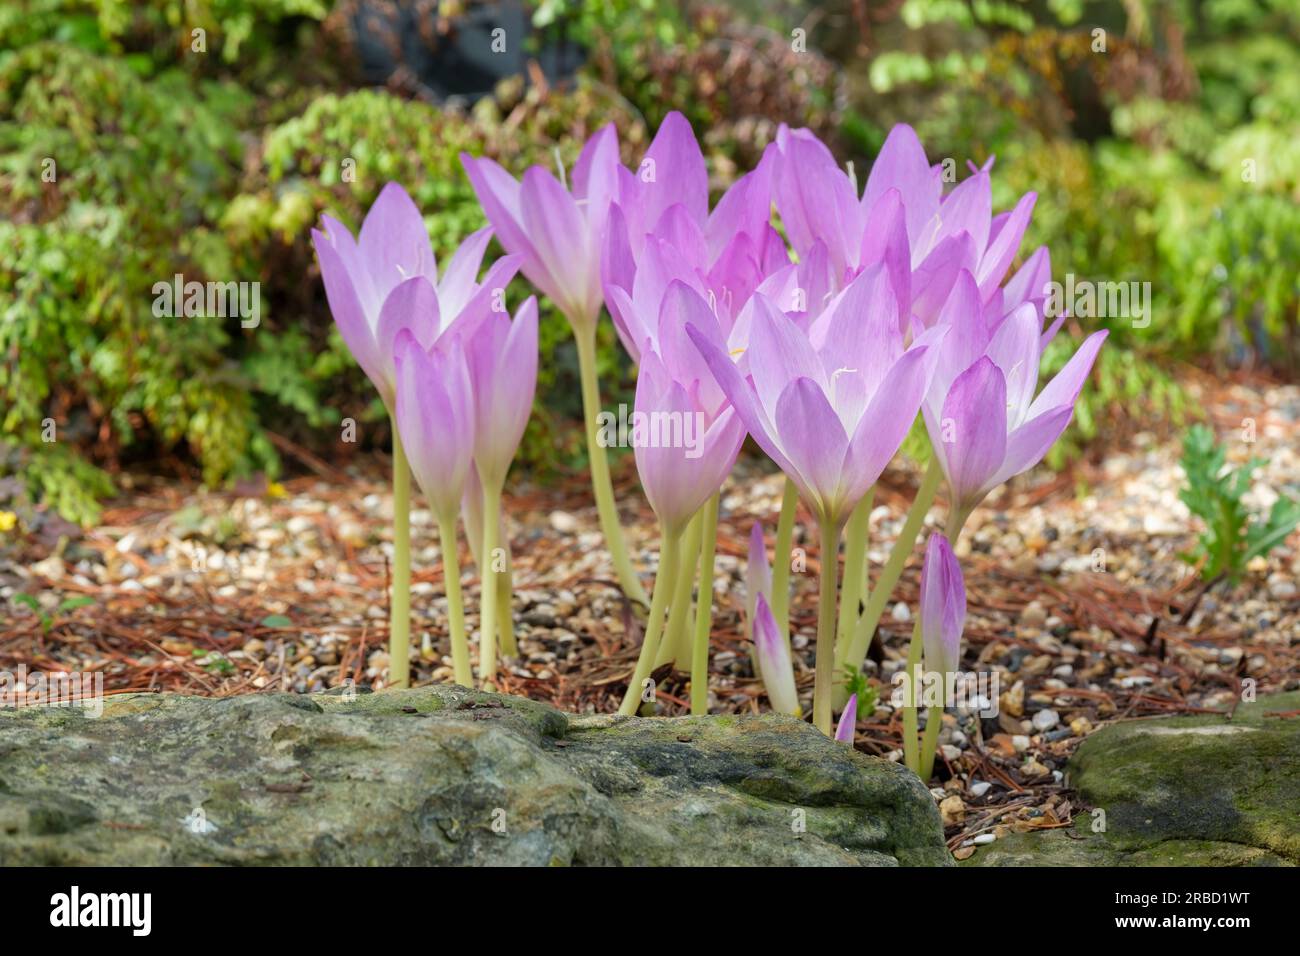 Colchicum speciosum, giant meadow saffron, perennial, pale mauve/pink flowers in late summer Stock Photo